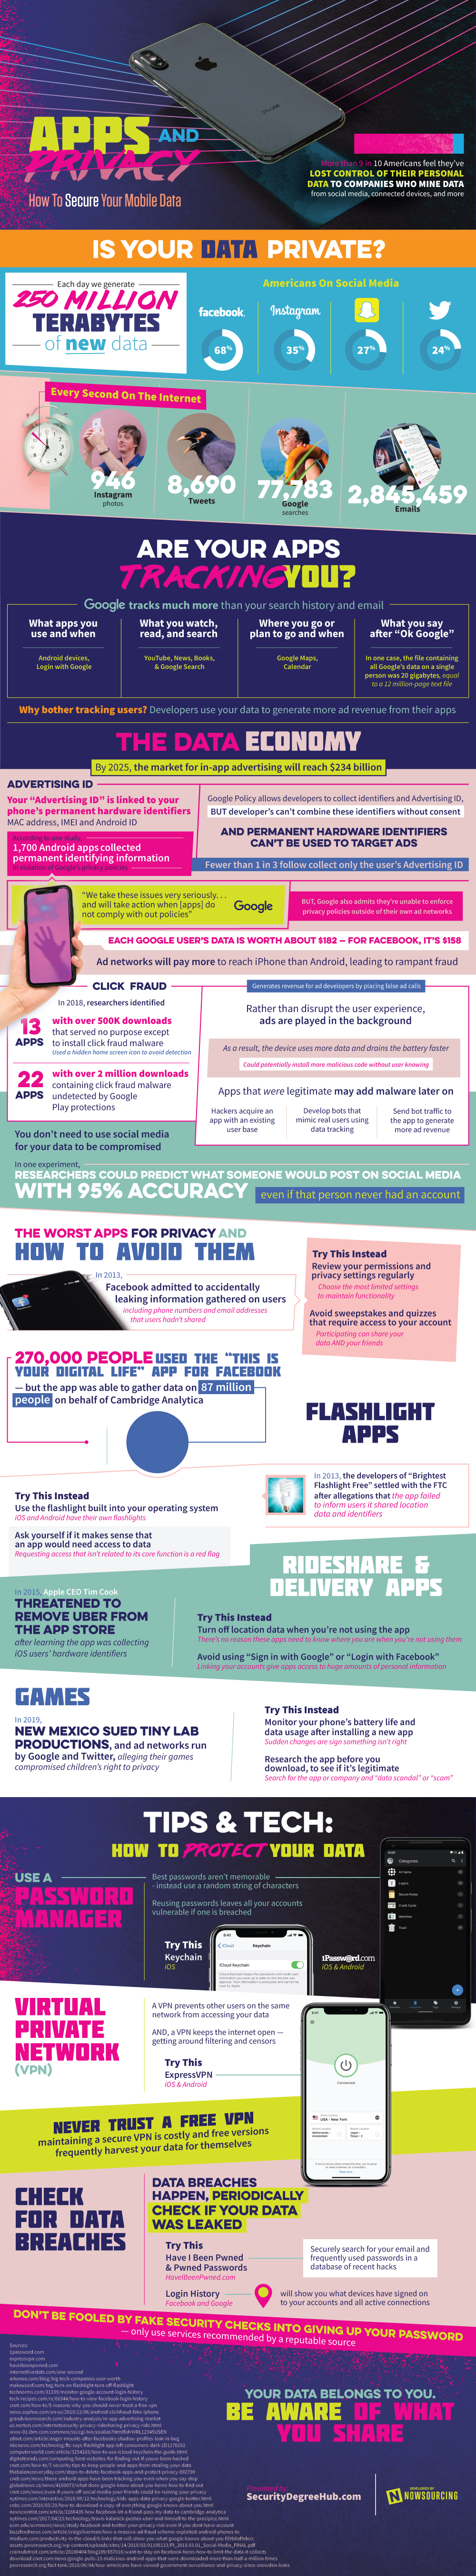 Apps That Still Collect Your Data, Even With Revoked Permissions #infographic